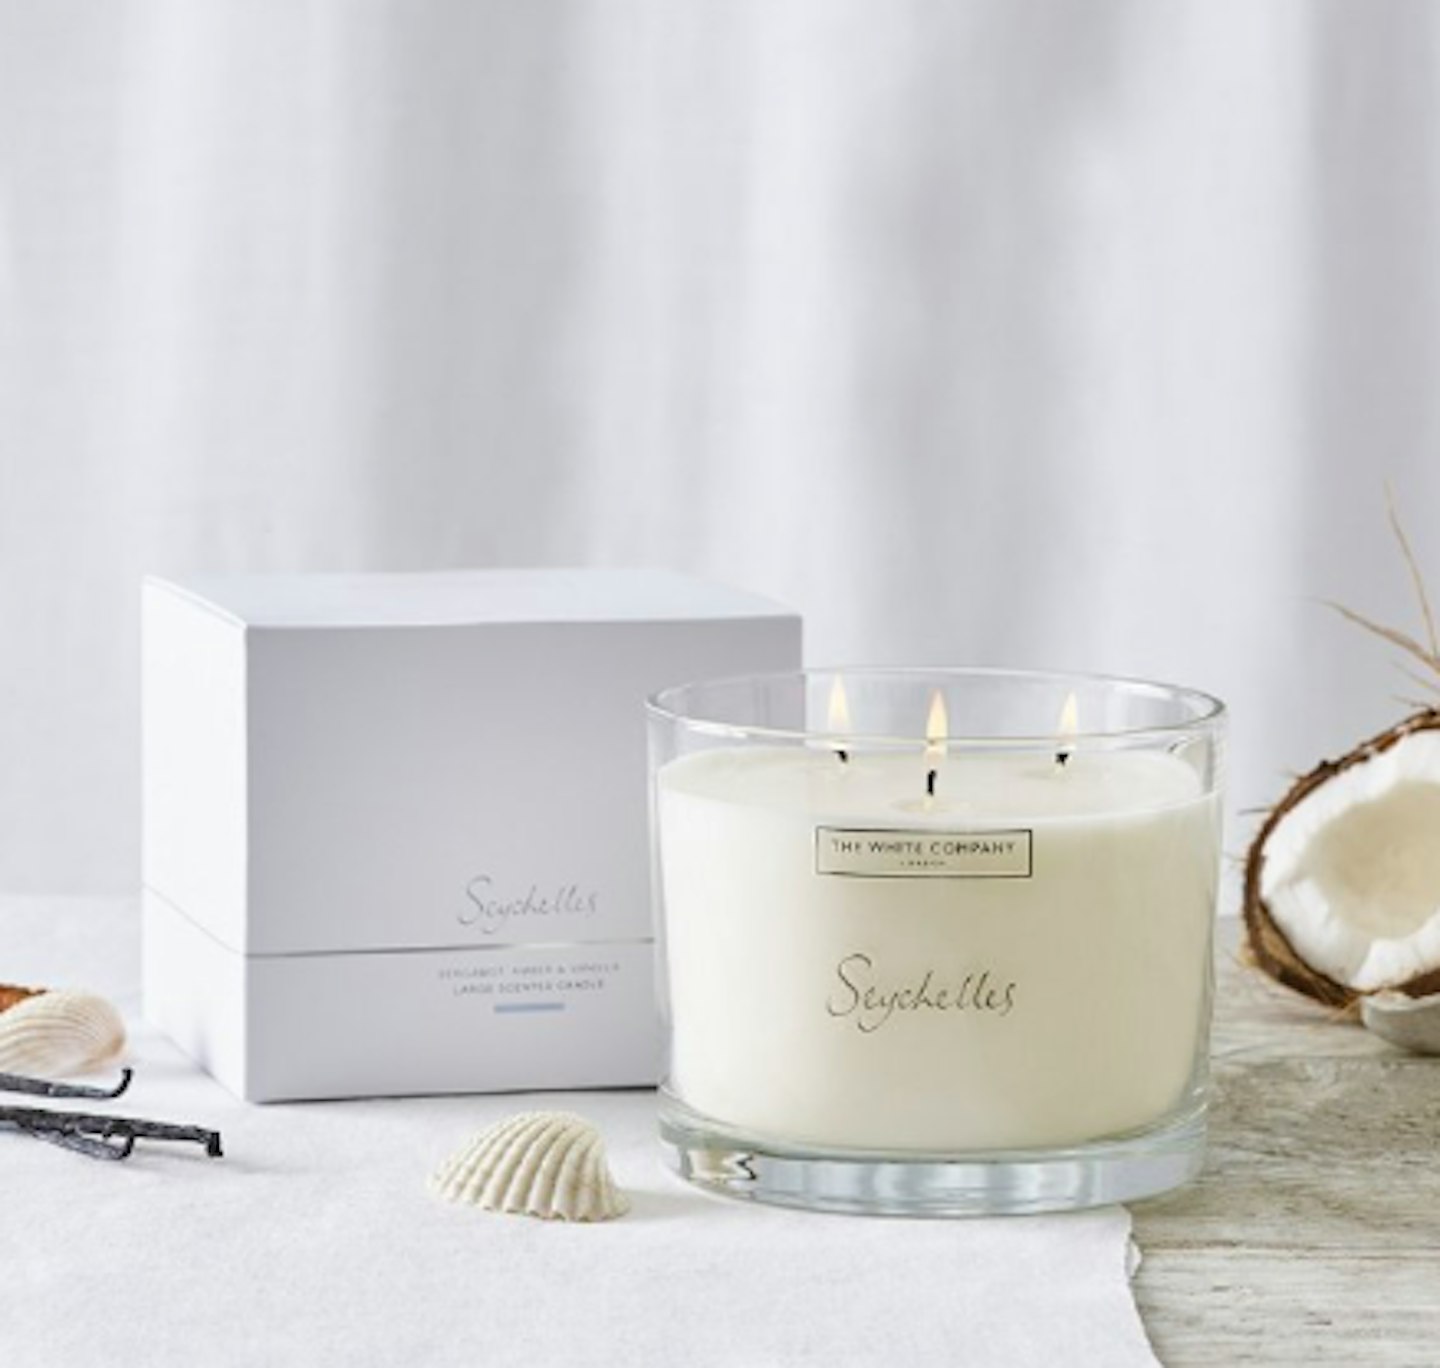 The White Company Syechelles Candles